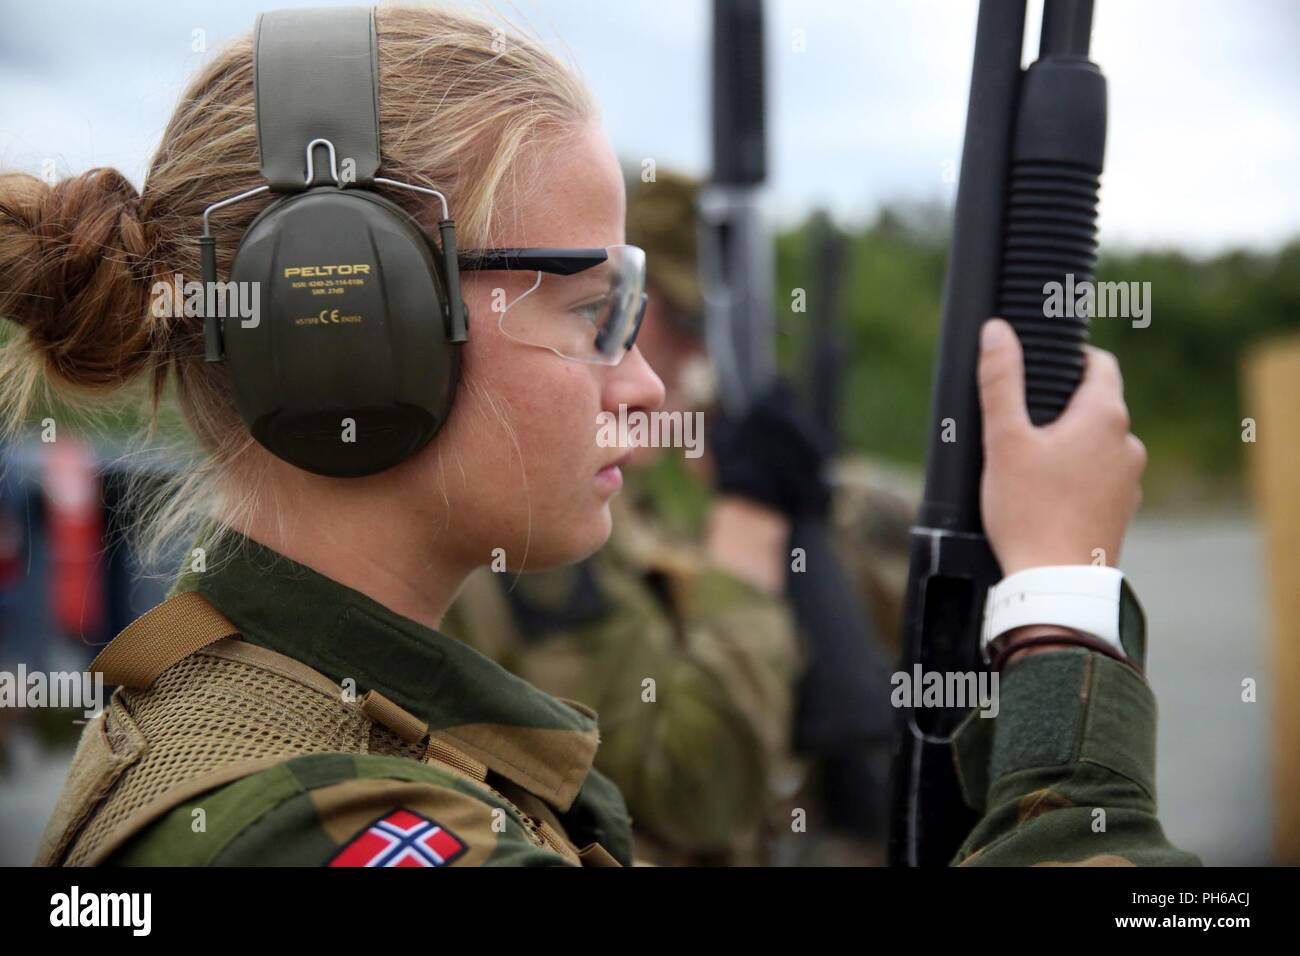 A Norwegian military policeman prepares to fire an M500 shotgun during a shotgun range at Leksdal Skytefelt Training Complex, Norway, June 28, 2018. The multinational training allowed the service members to cross-train with American and Norwegian weapon systems including assault rifles, shotguns, and pistols. The Marines and Norwegian soldiers practiced firing from the kneeling and standing positions while moving between barricades. Stock Photo